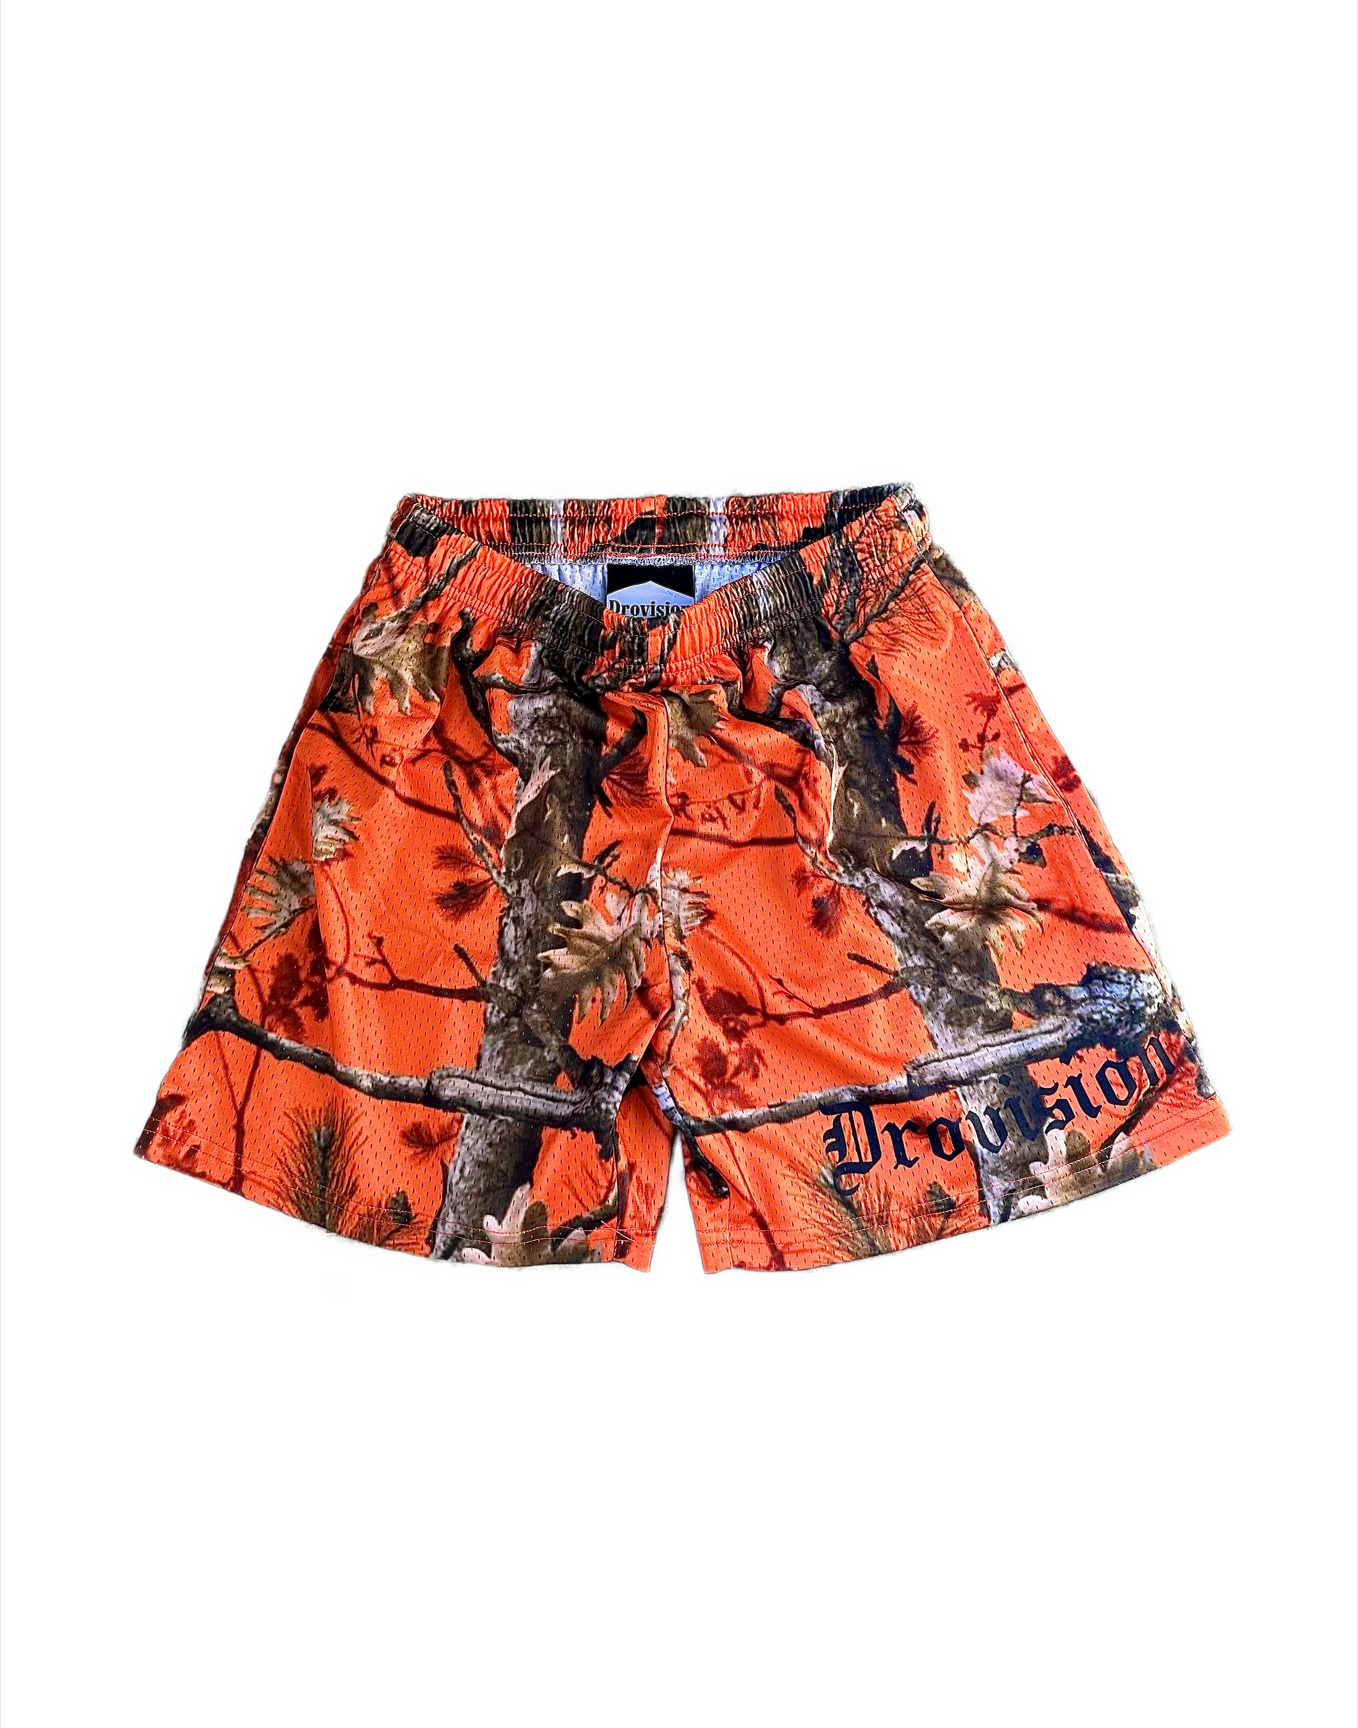 Load image into Gallery viewer, Drovision Orange Camo Shorts (DRO)
